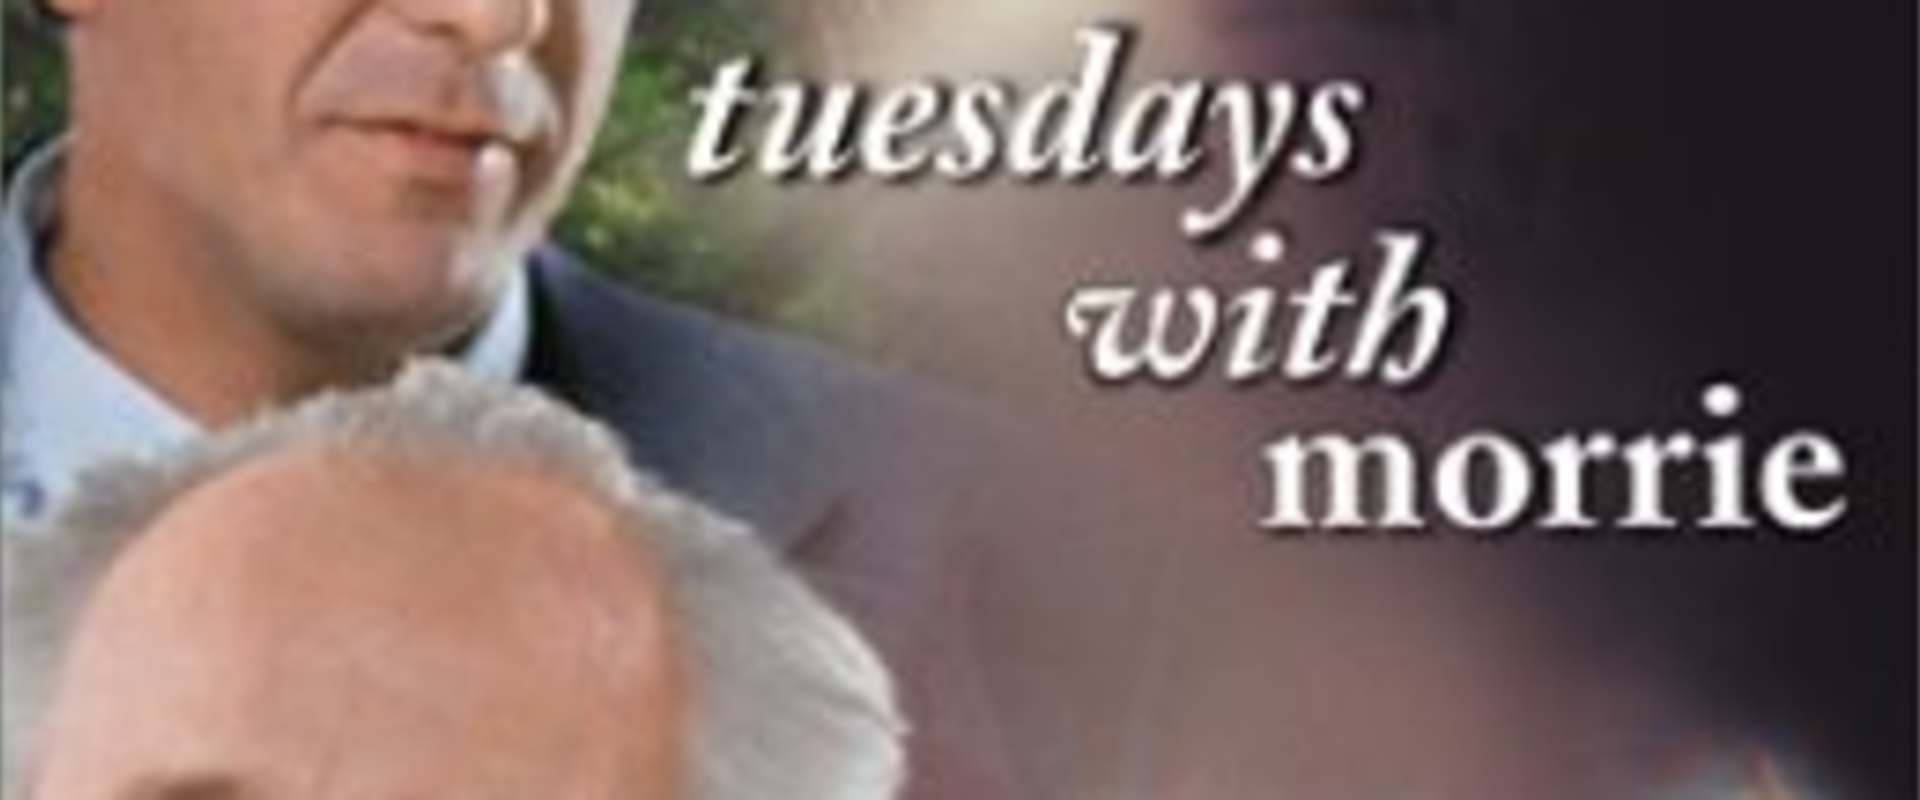 Tuesdays With Morrie - Rotten Tomatoes